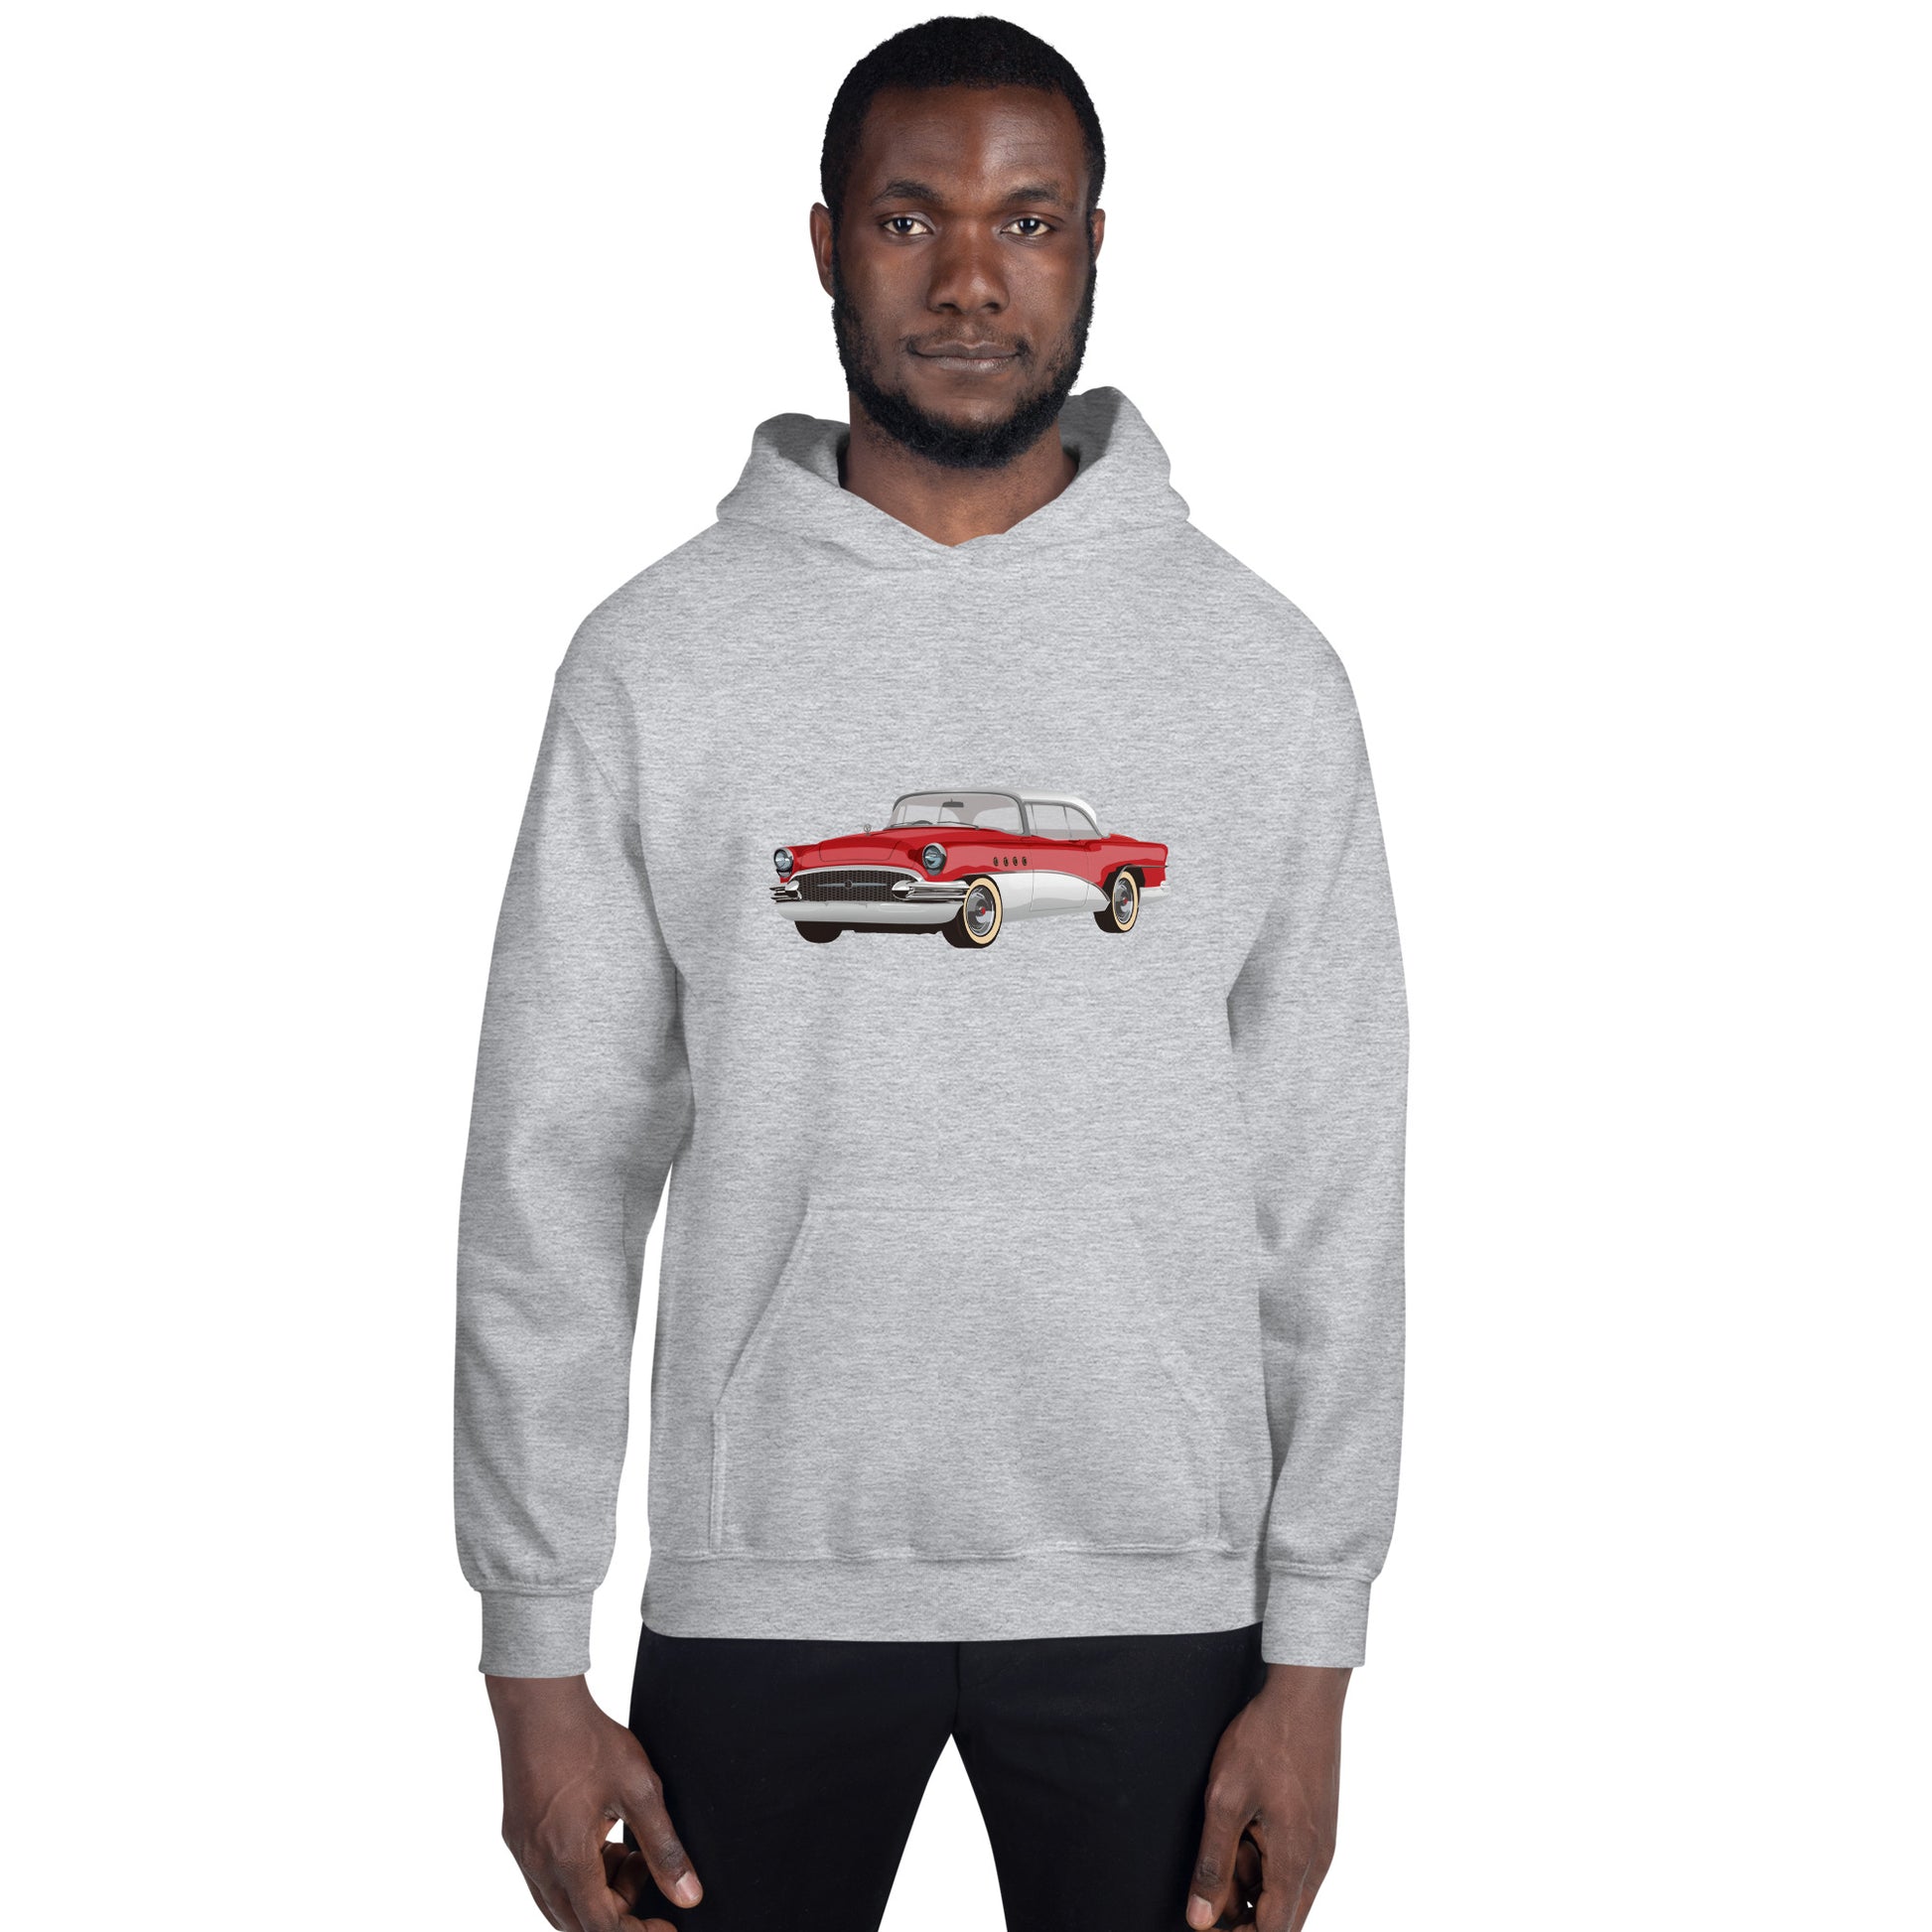 Men with grey hoodie with red Chevrolet 